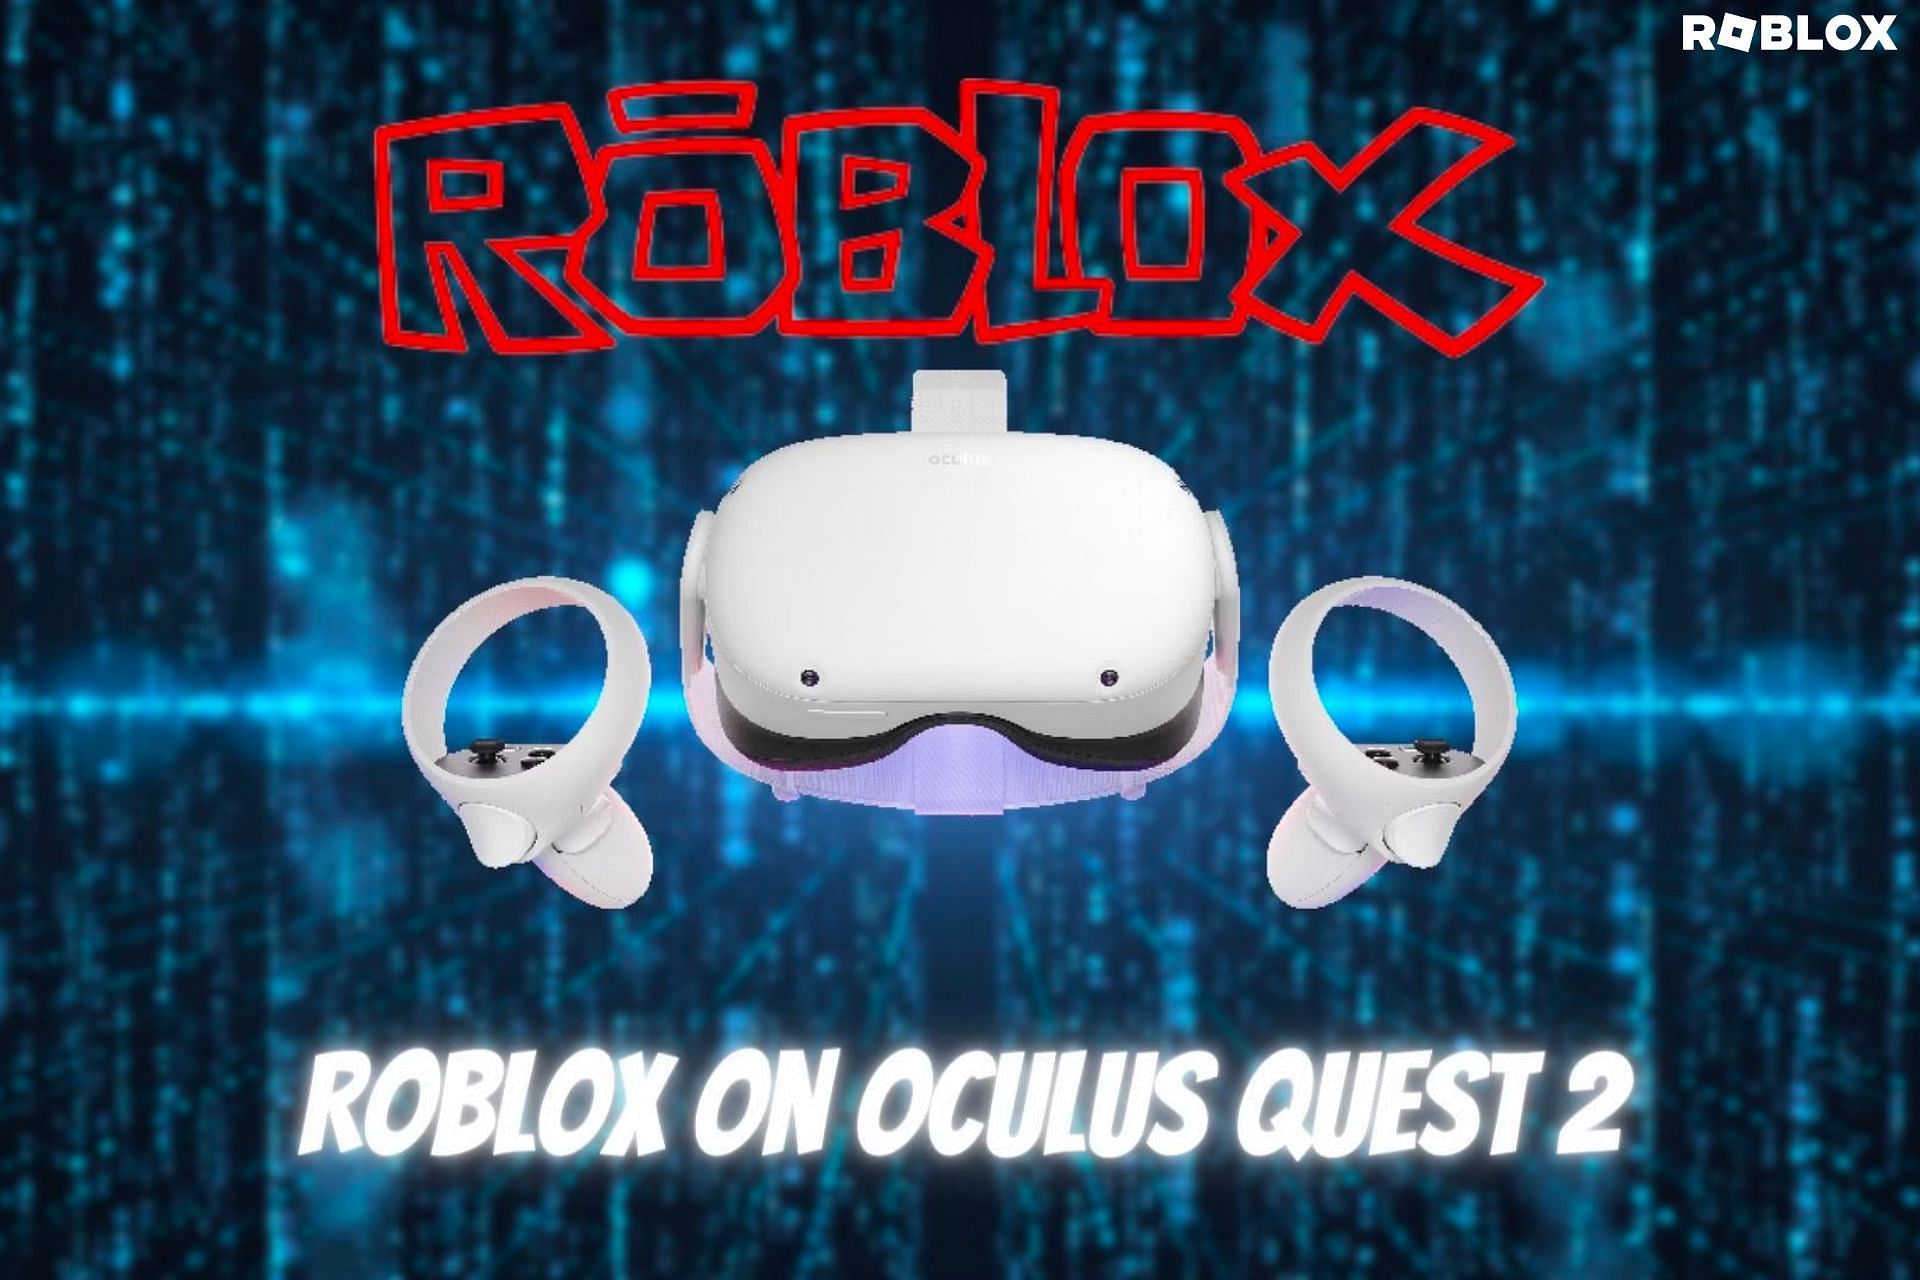 Play Roblox Online - Have Fun with Virtual Reality Gaming